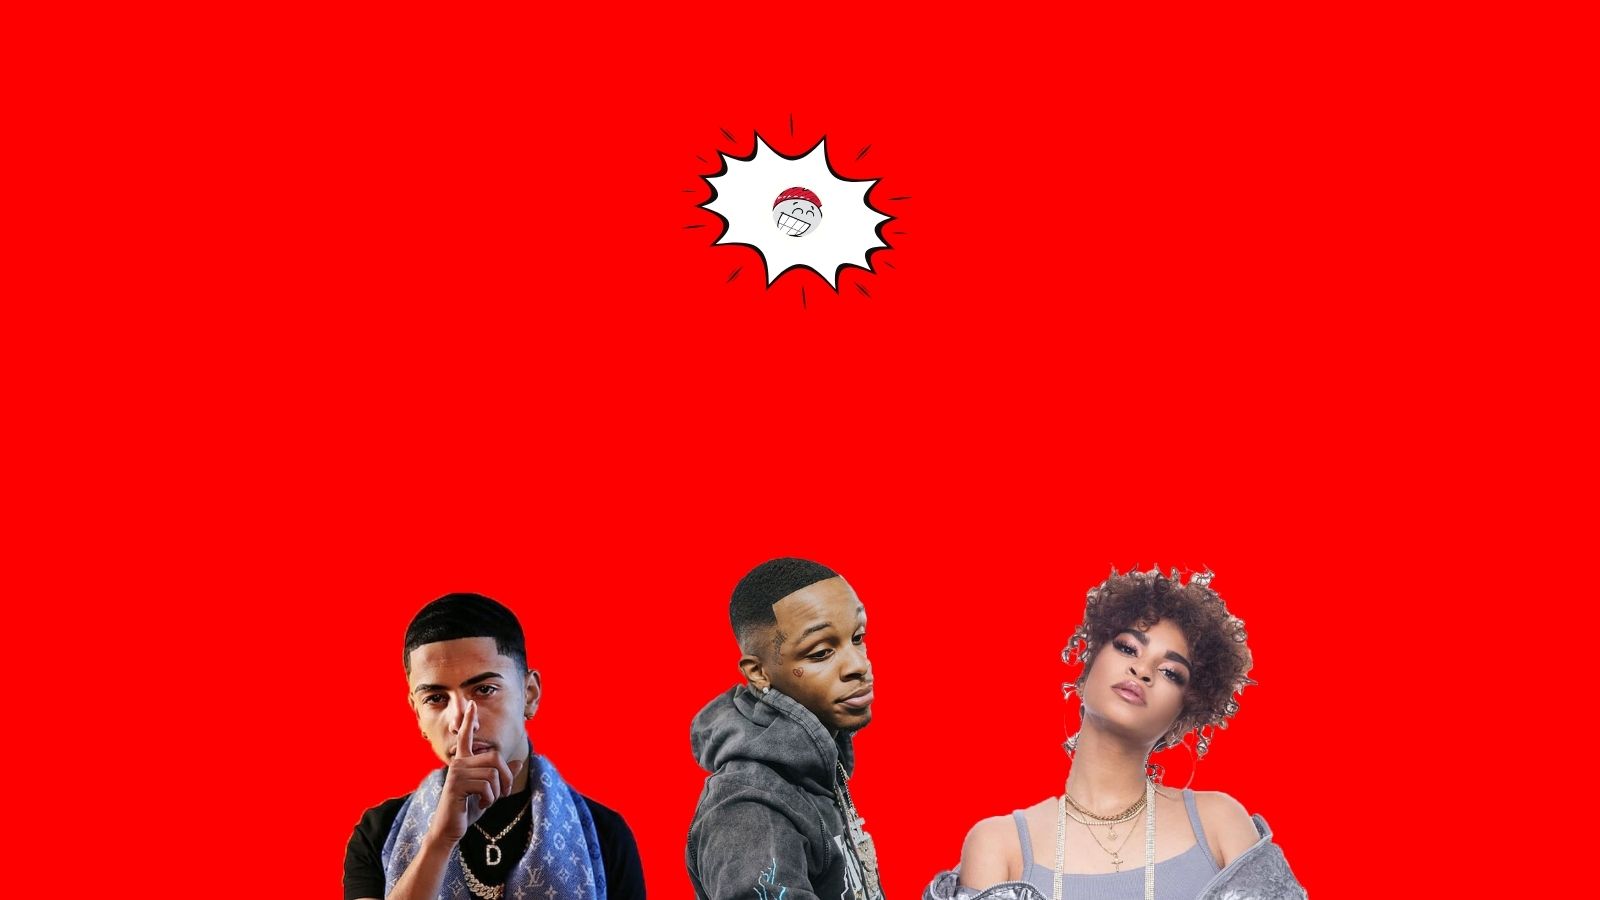 Top 5 Up-And-Coming Hip-Hop Artists To Watch In 2021